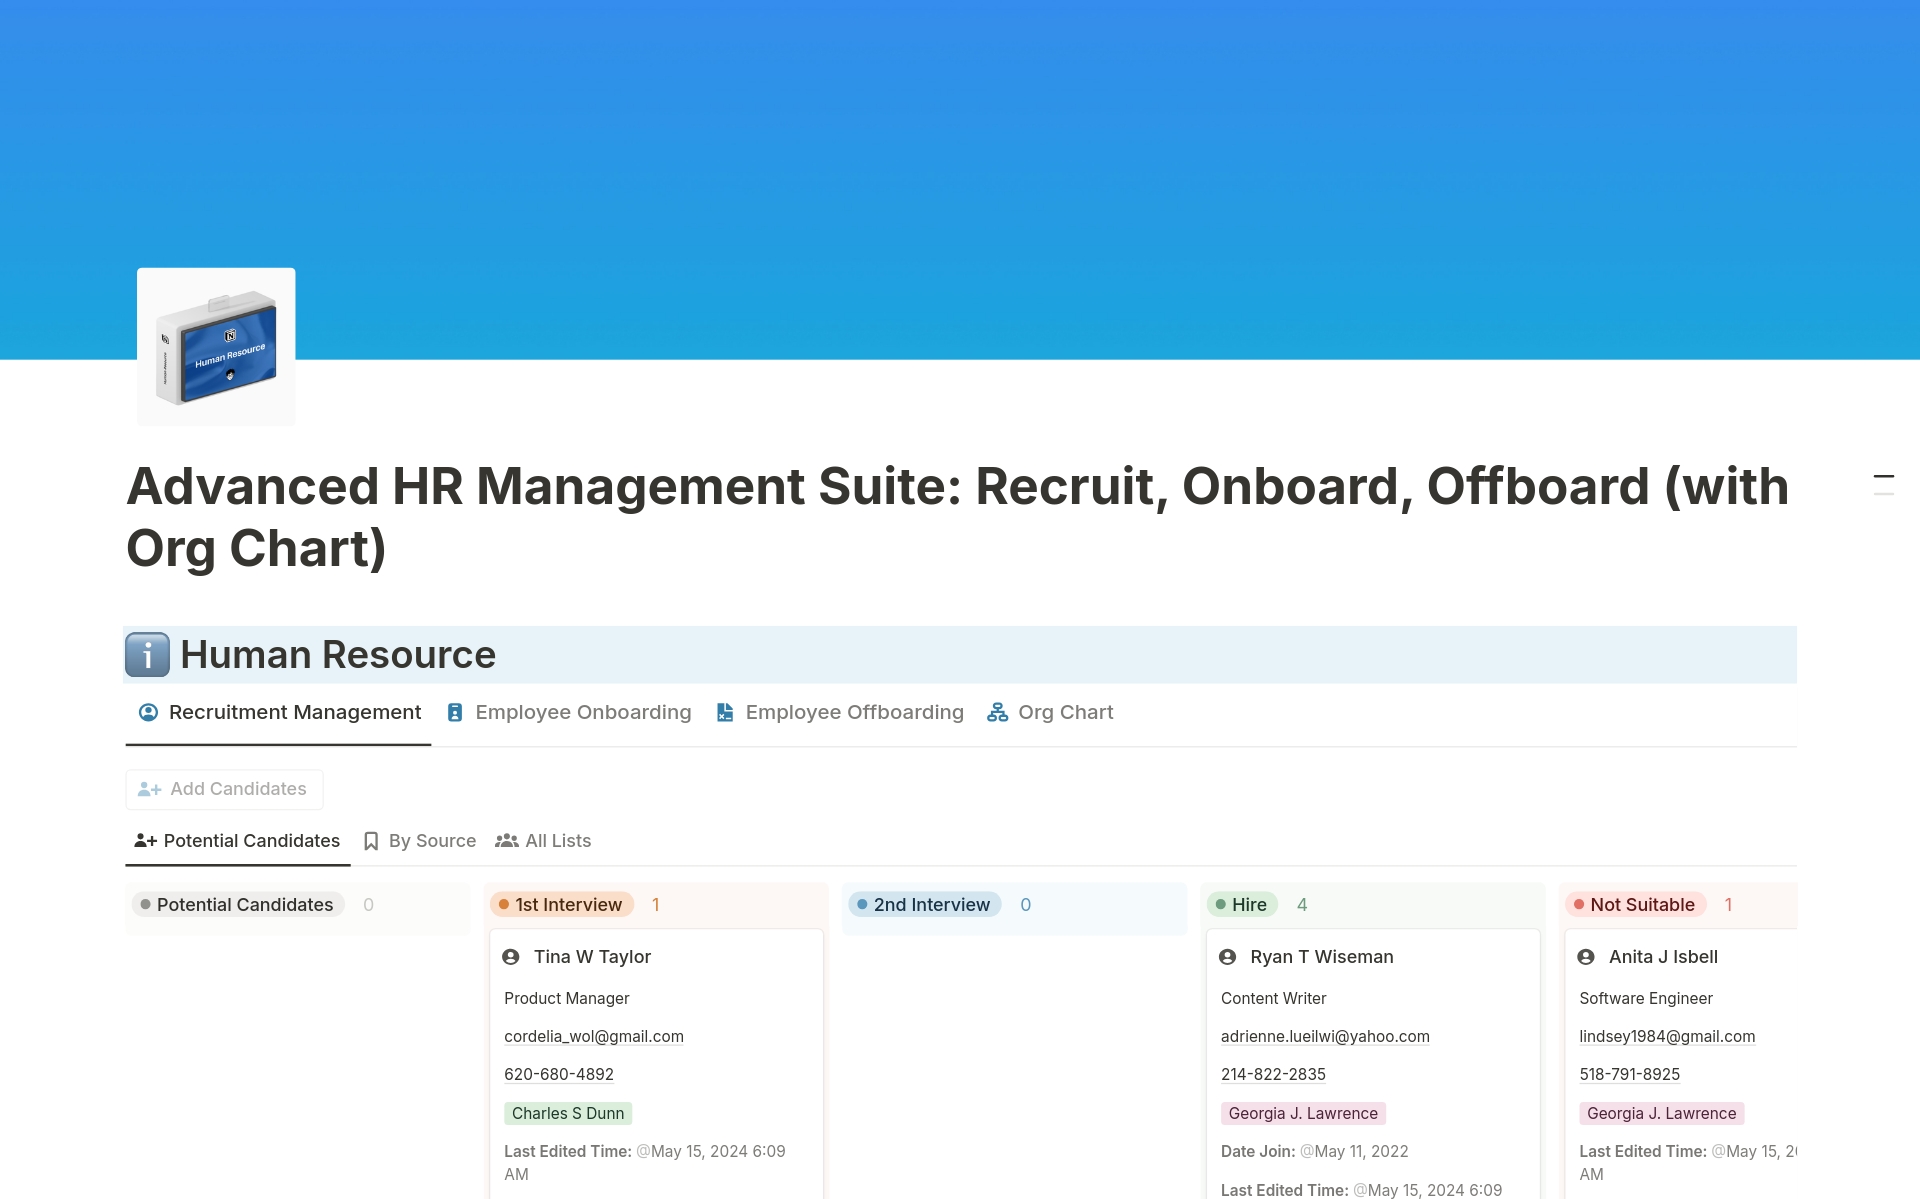 Optimize HR workflow from recruiting to offboarding:
✓ Recruitment Management: Visualize progress, detail with tables
✓ Employee Onboarding: Track tasks, view comprehensively
✓ Employee Offboarding: Manage tasks, clear overview
✓ Org Chart: Detailed info, visual company structure